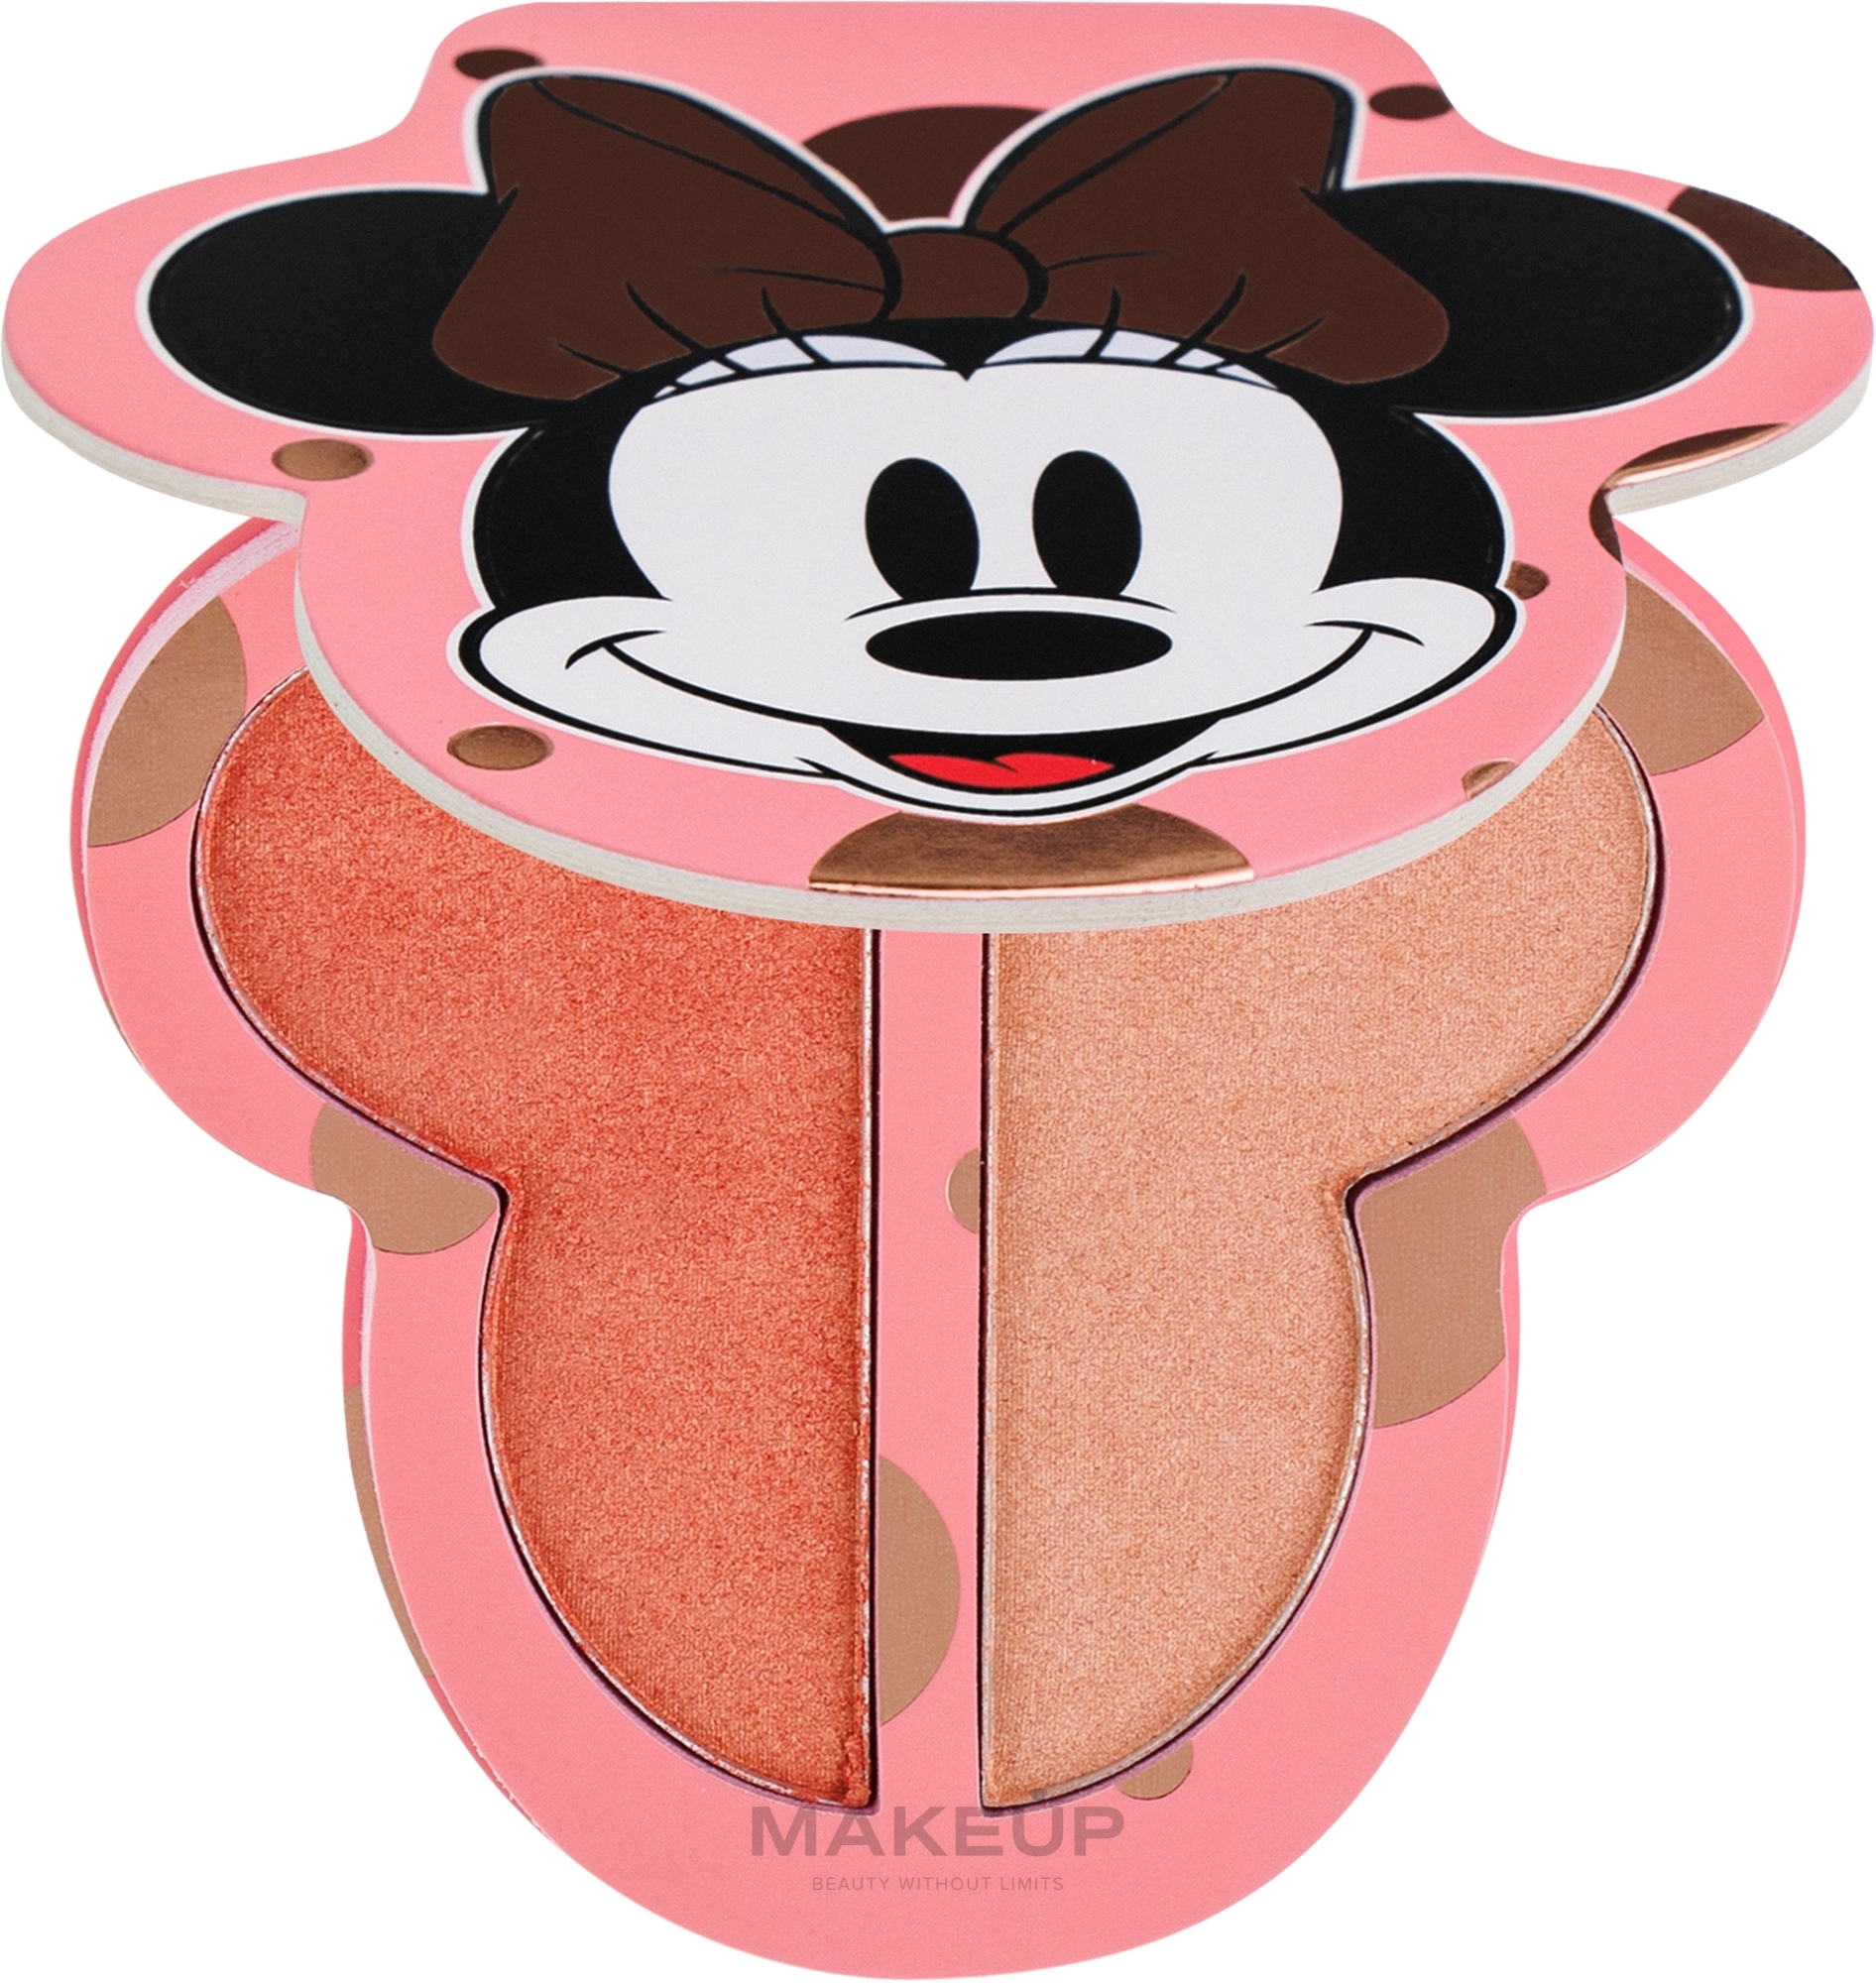 Highlighter Palette - Makeup Revolution Disney's Minnie Mouse Minnie Forever Highlighter Duo — photo 8.4 g